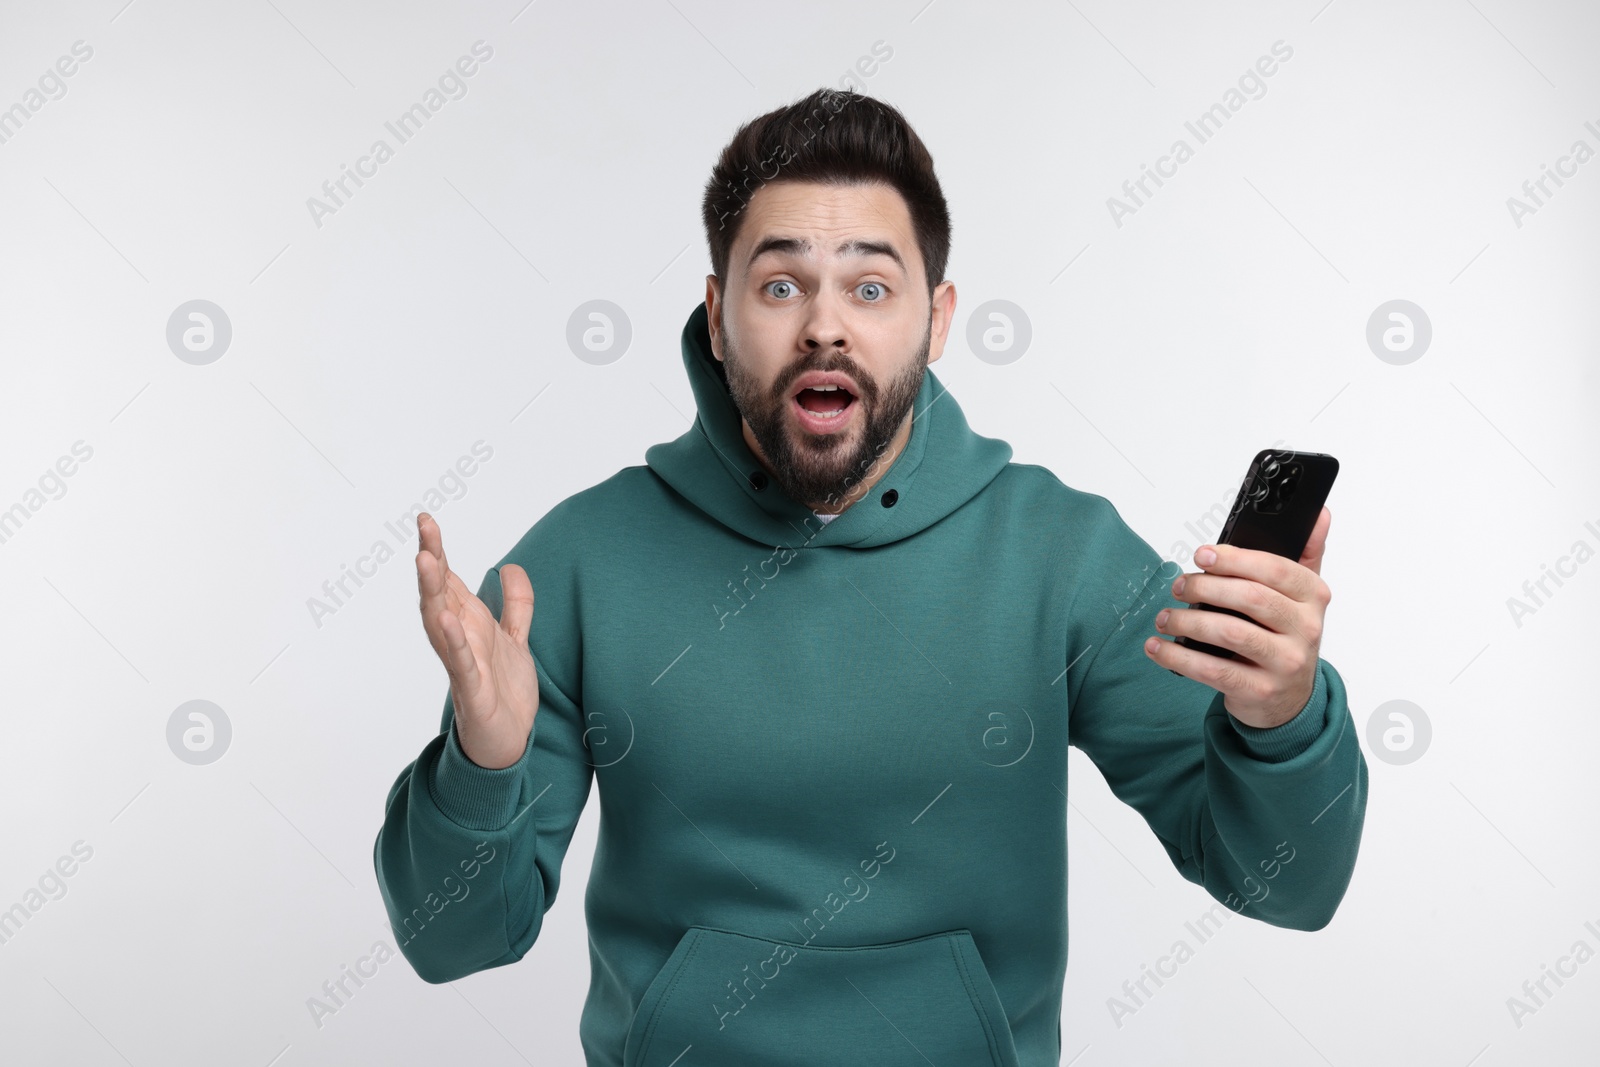 Photo of Shocked young man using smartphone on white background